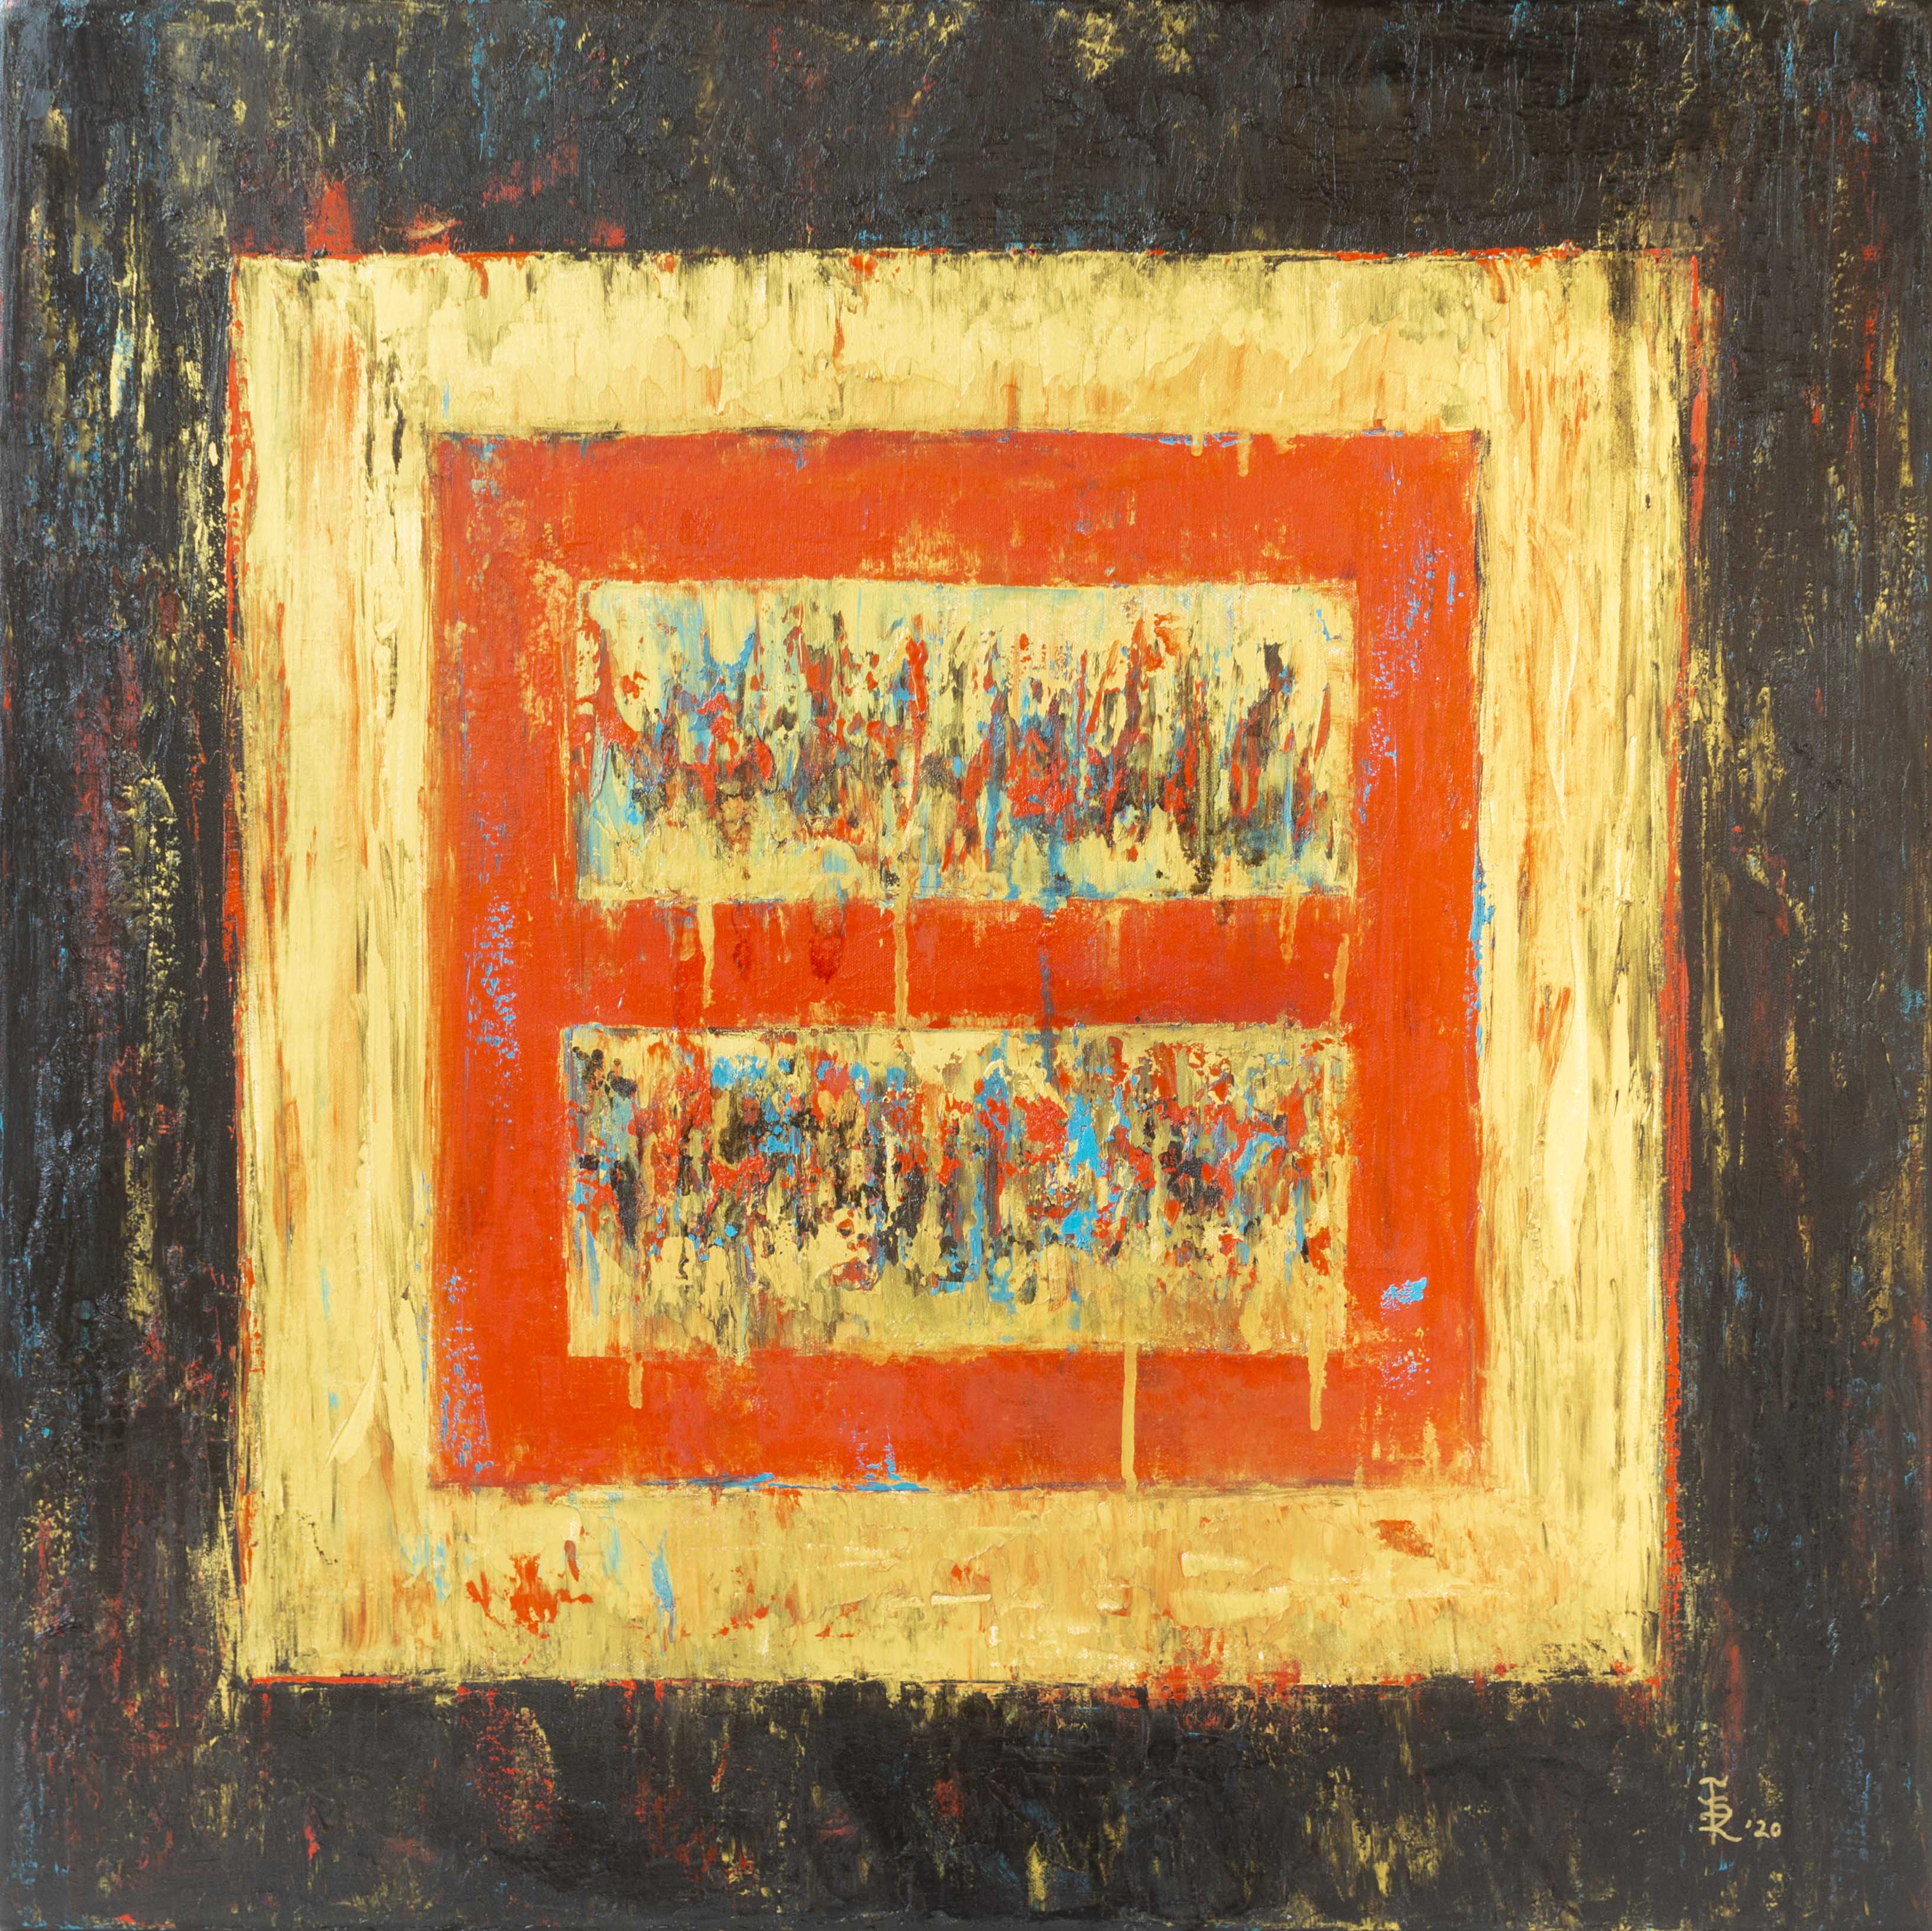 Alex Galleries Announces Solo Exhibition of Jill Krutick’s Abstract Paintings: "Beyond Boundaries: an Homage to Rothko," April 3–30, 2020